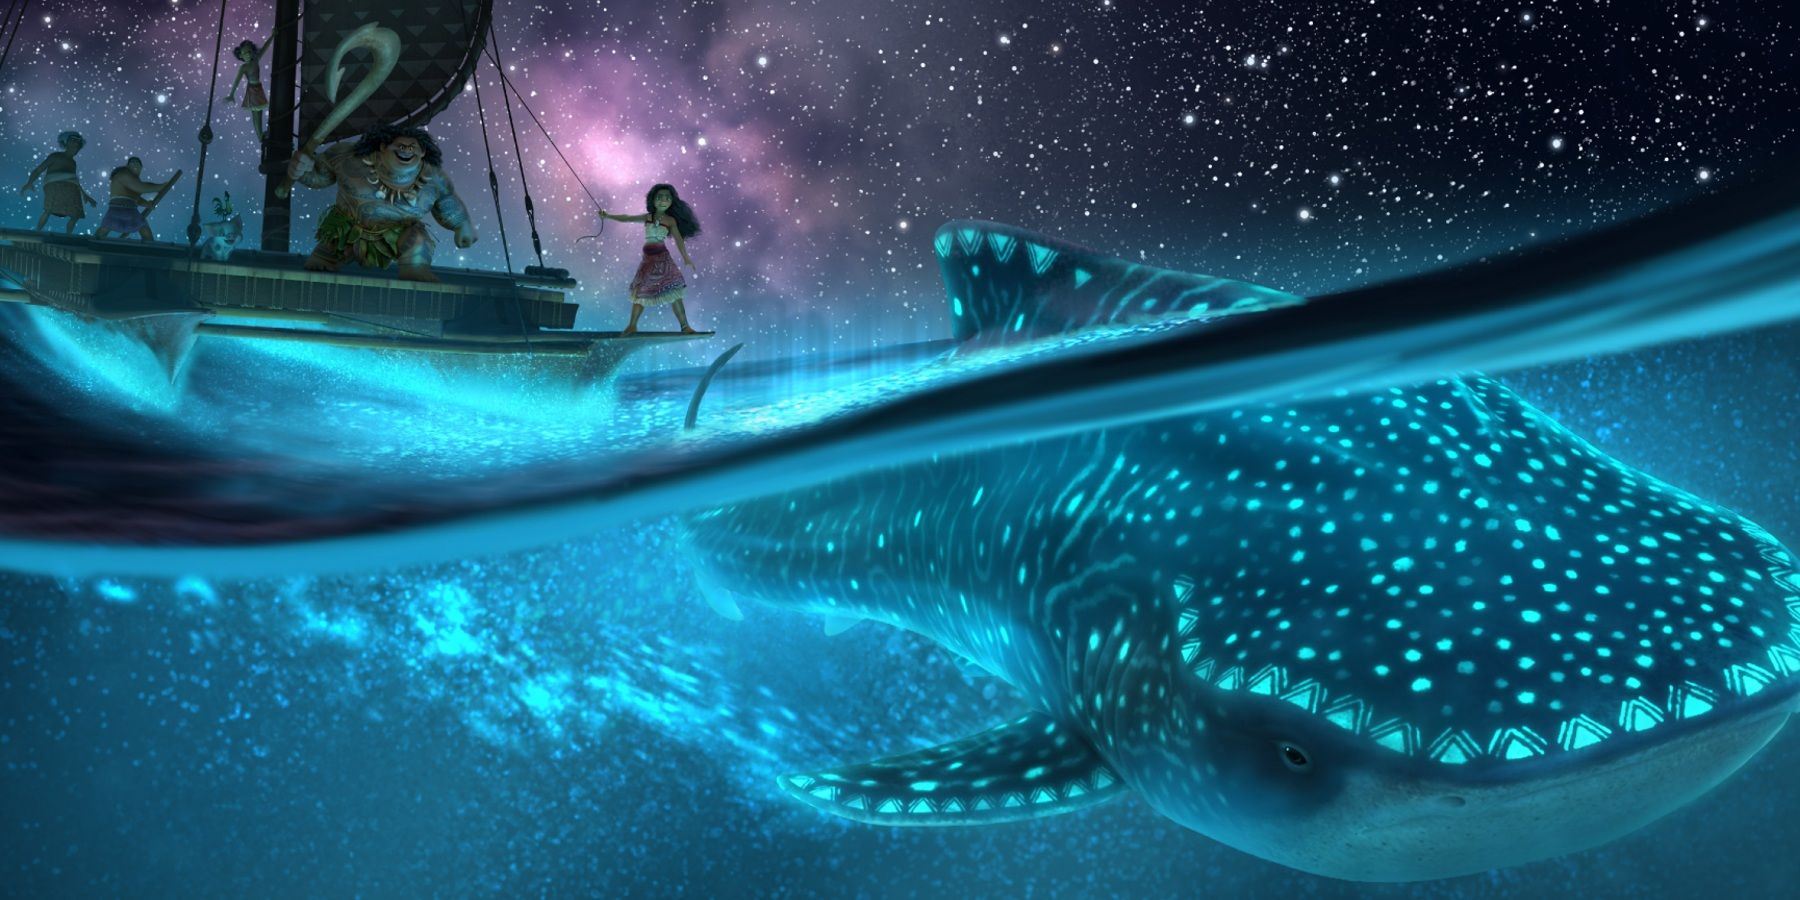 Moana and Maui on a boat as a whale passes beneath them in Moana 2